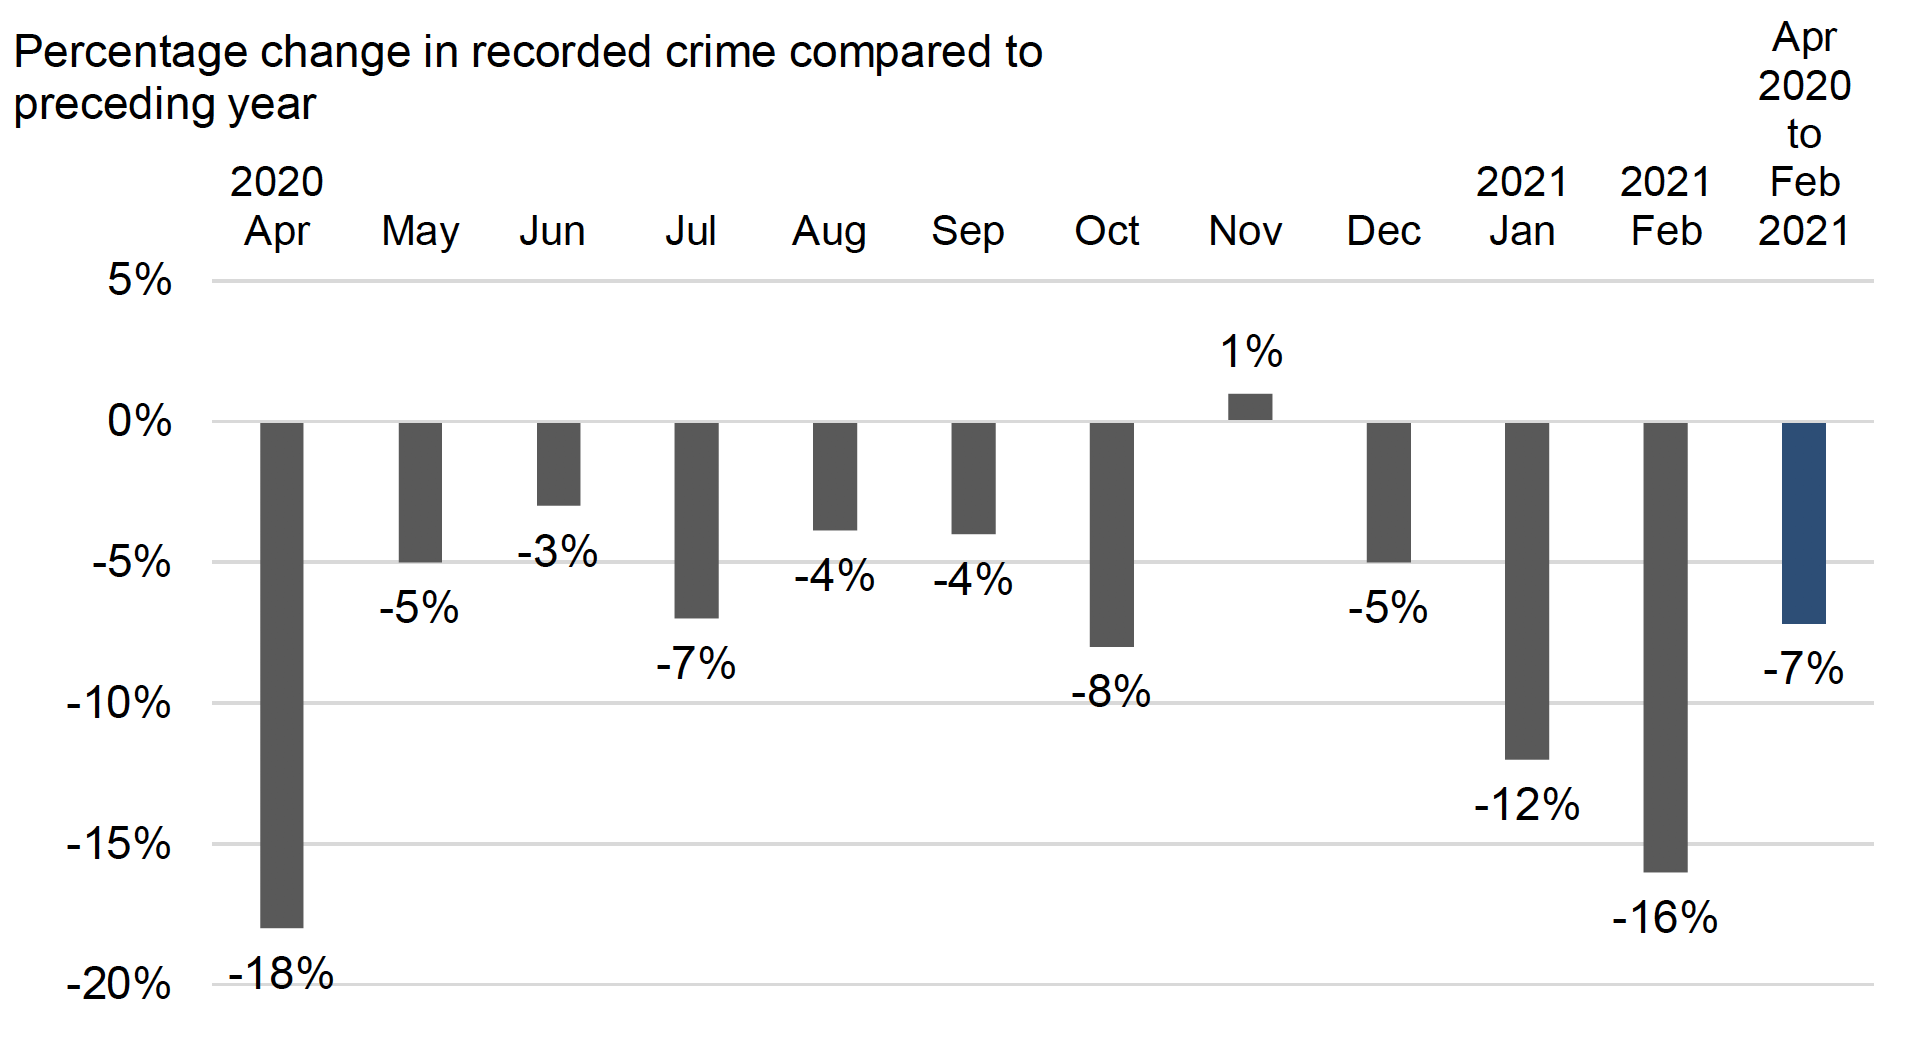 Bar chart showing the change in recorded crime for each month from April 2020 to February 2021, compared to the equivalent months in the previous year. 